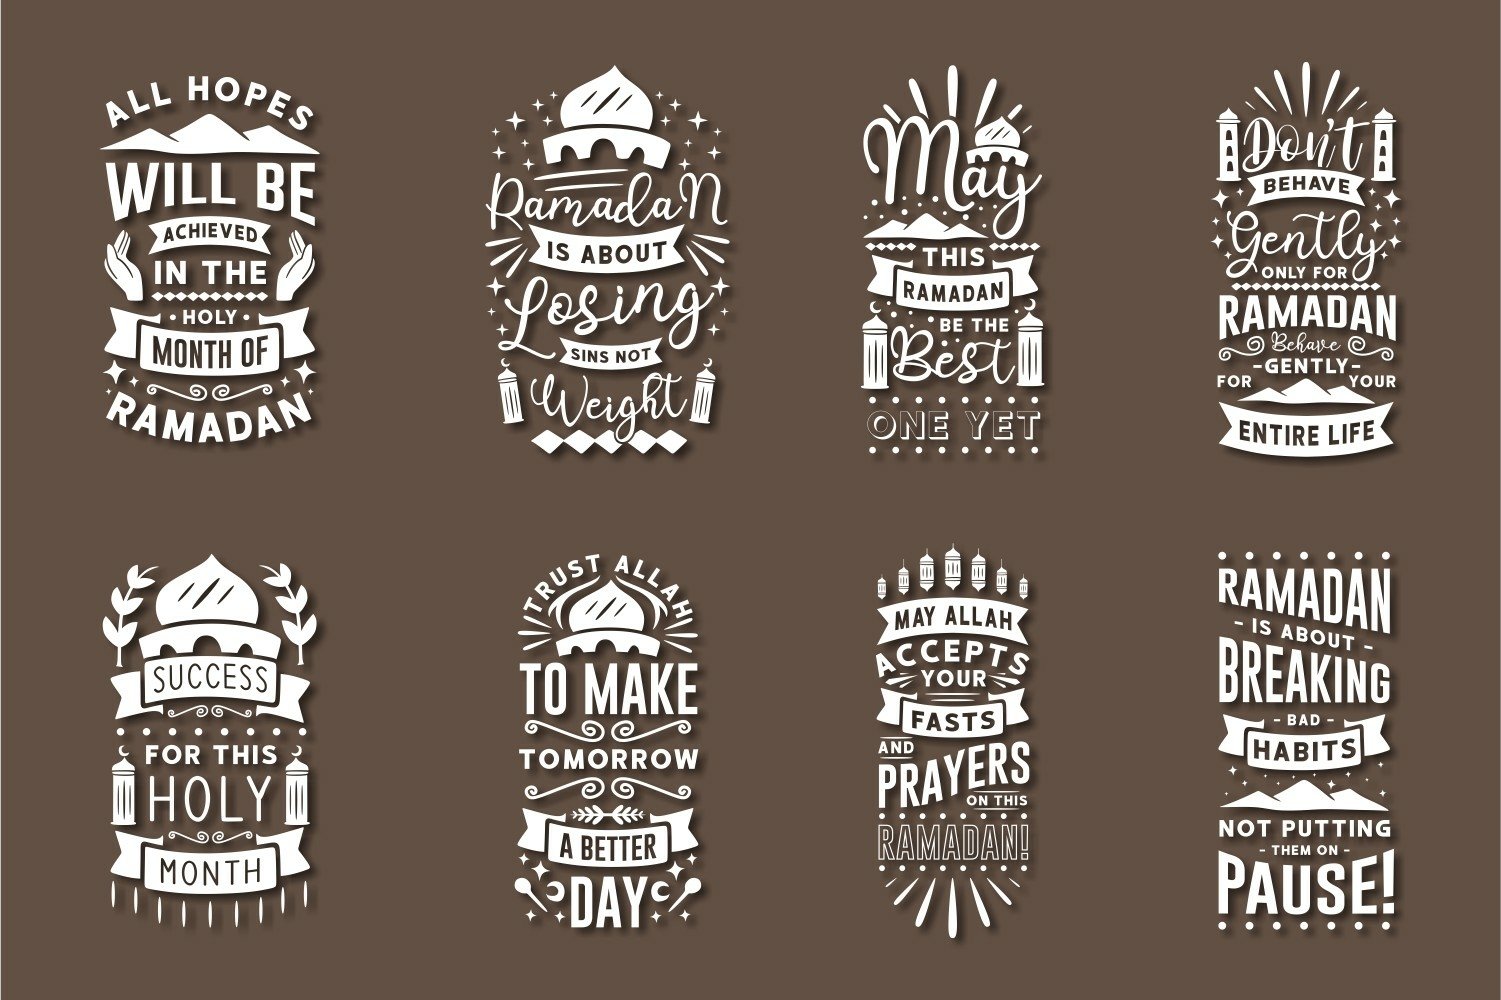 Some set of the ramadan phrases with illustration.